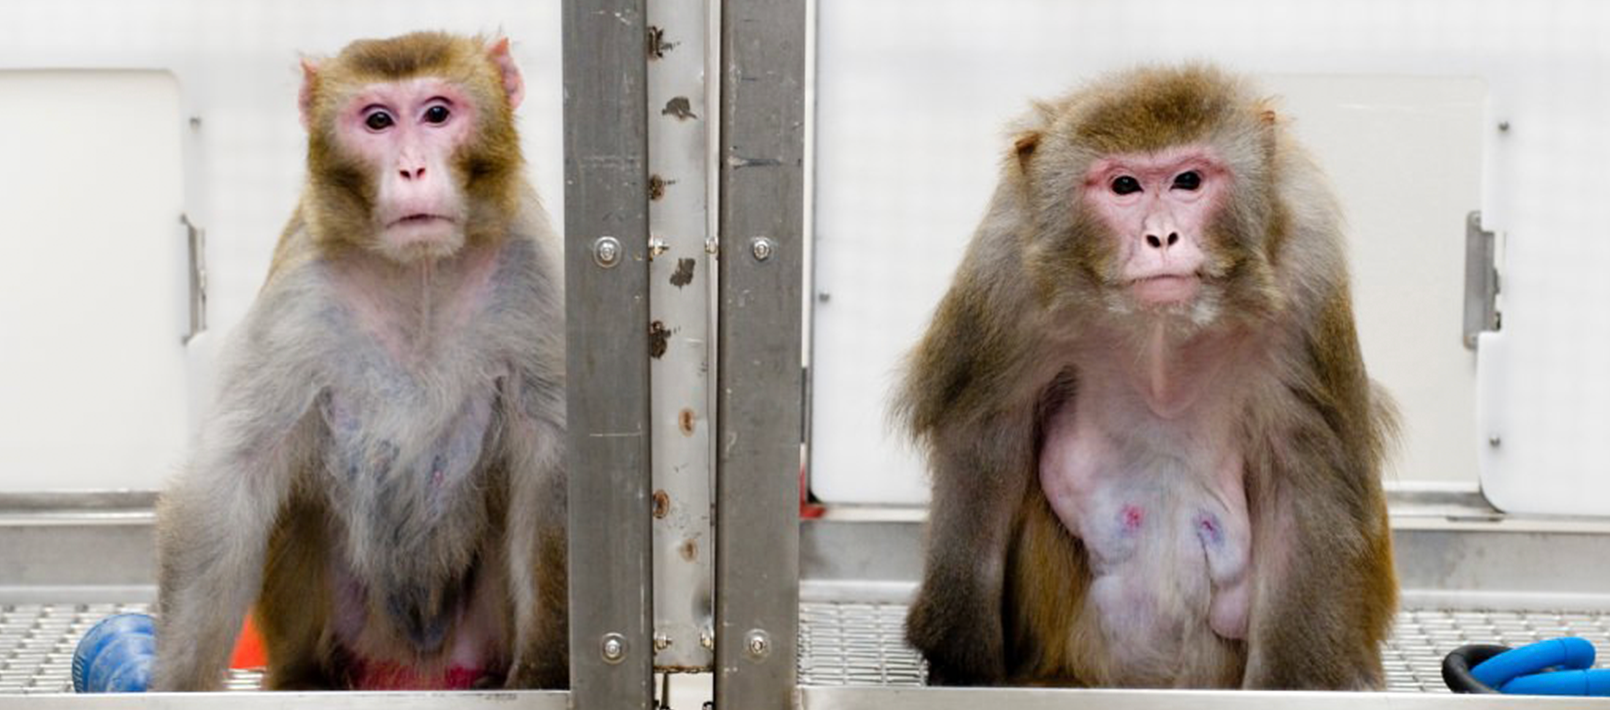 Two rhesus monkeys: the monkey on the left was given a diet with fewer calories and is much leaner. The 29-monkey on the right was allowed to eat as much as it liked. It is fatter and has fatty-looking bulges in its abdominal area. Debunking the carbohydrate-insulin model